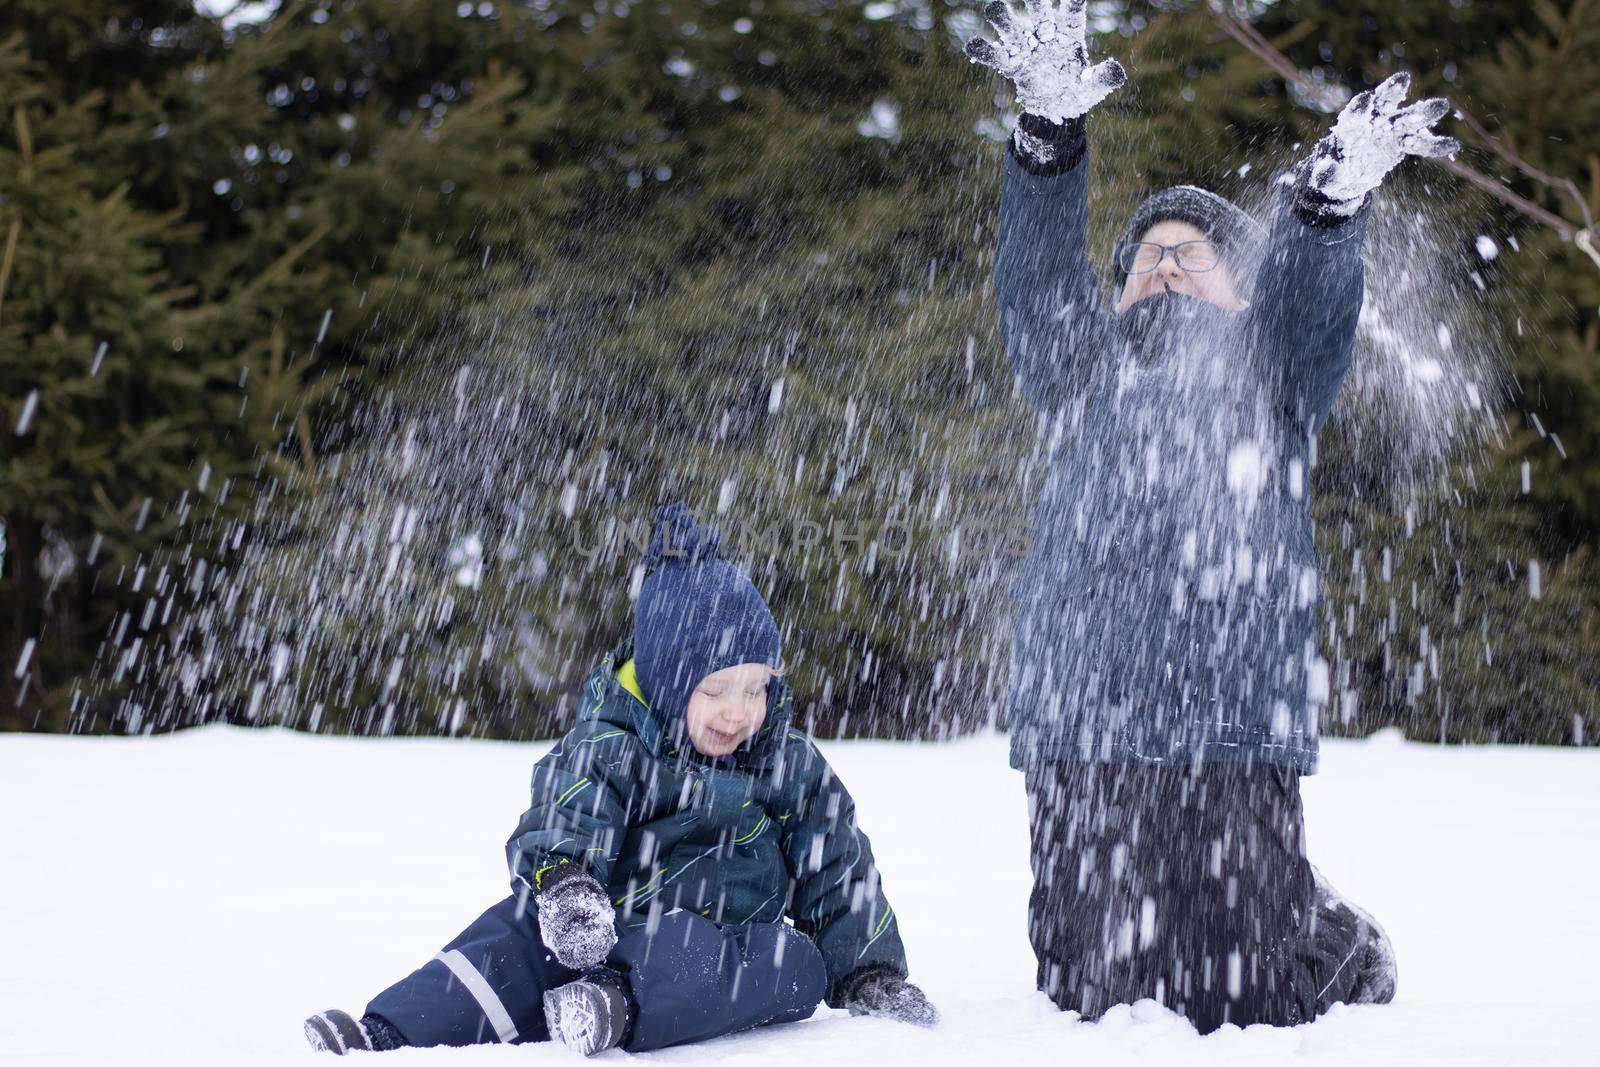 Winter fun, children play with snow, throwing it up, faces out of focus. by Sonluna